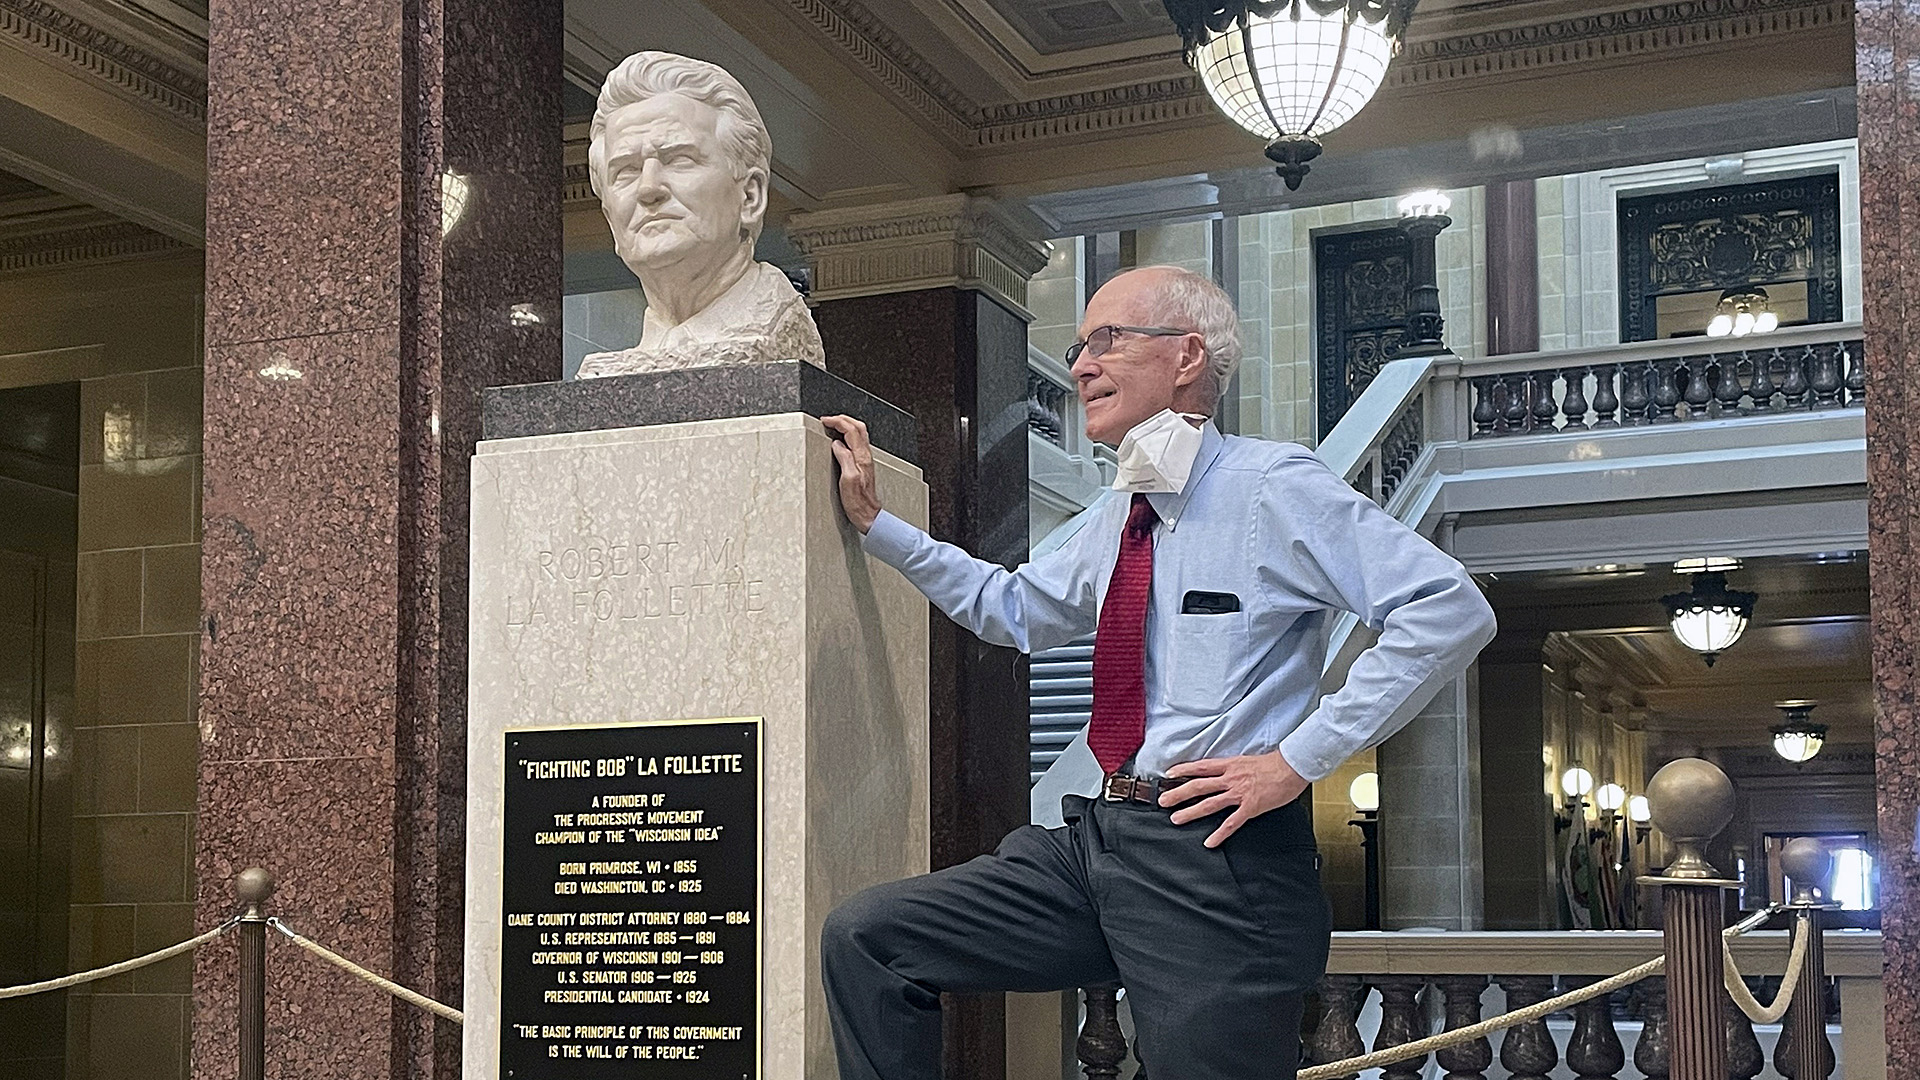 Doug La Follette poses next to a bust of "Fighting Bob La Follette" placed atop a plinth in the rotunda of the Wisconsin State Capitol, with hallways, staircases and bannisters made with marble masonry in the background.